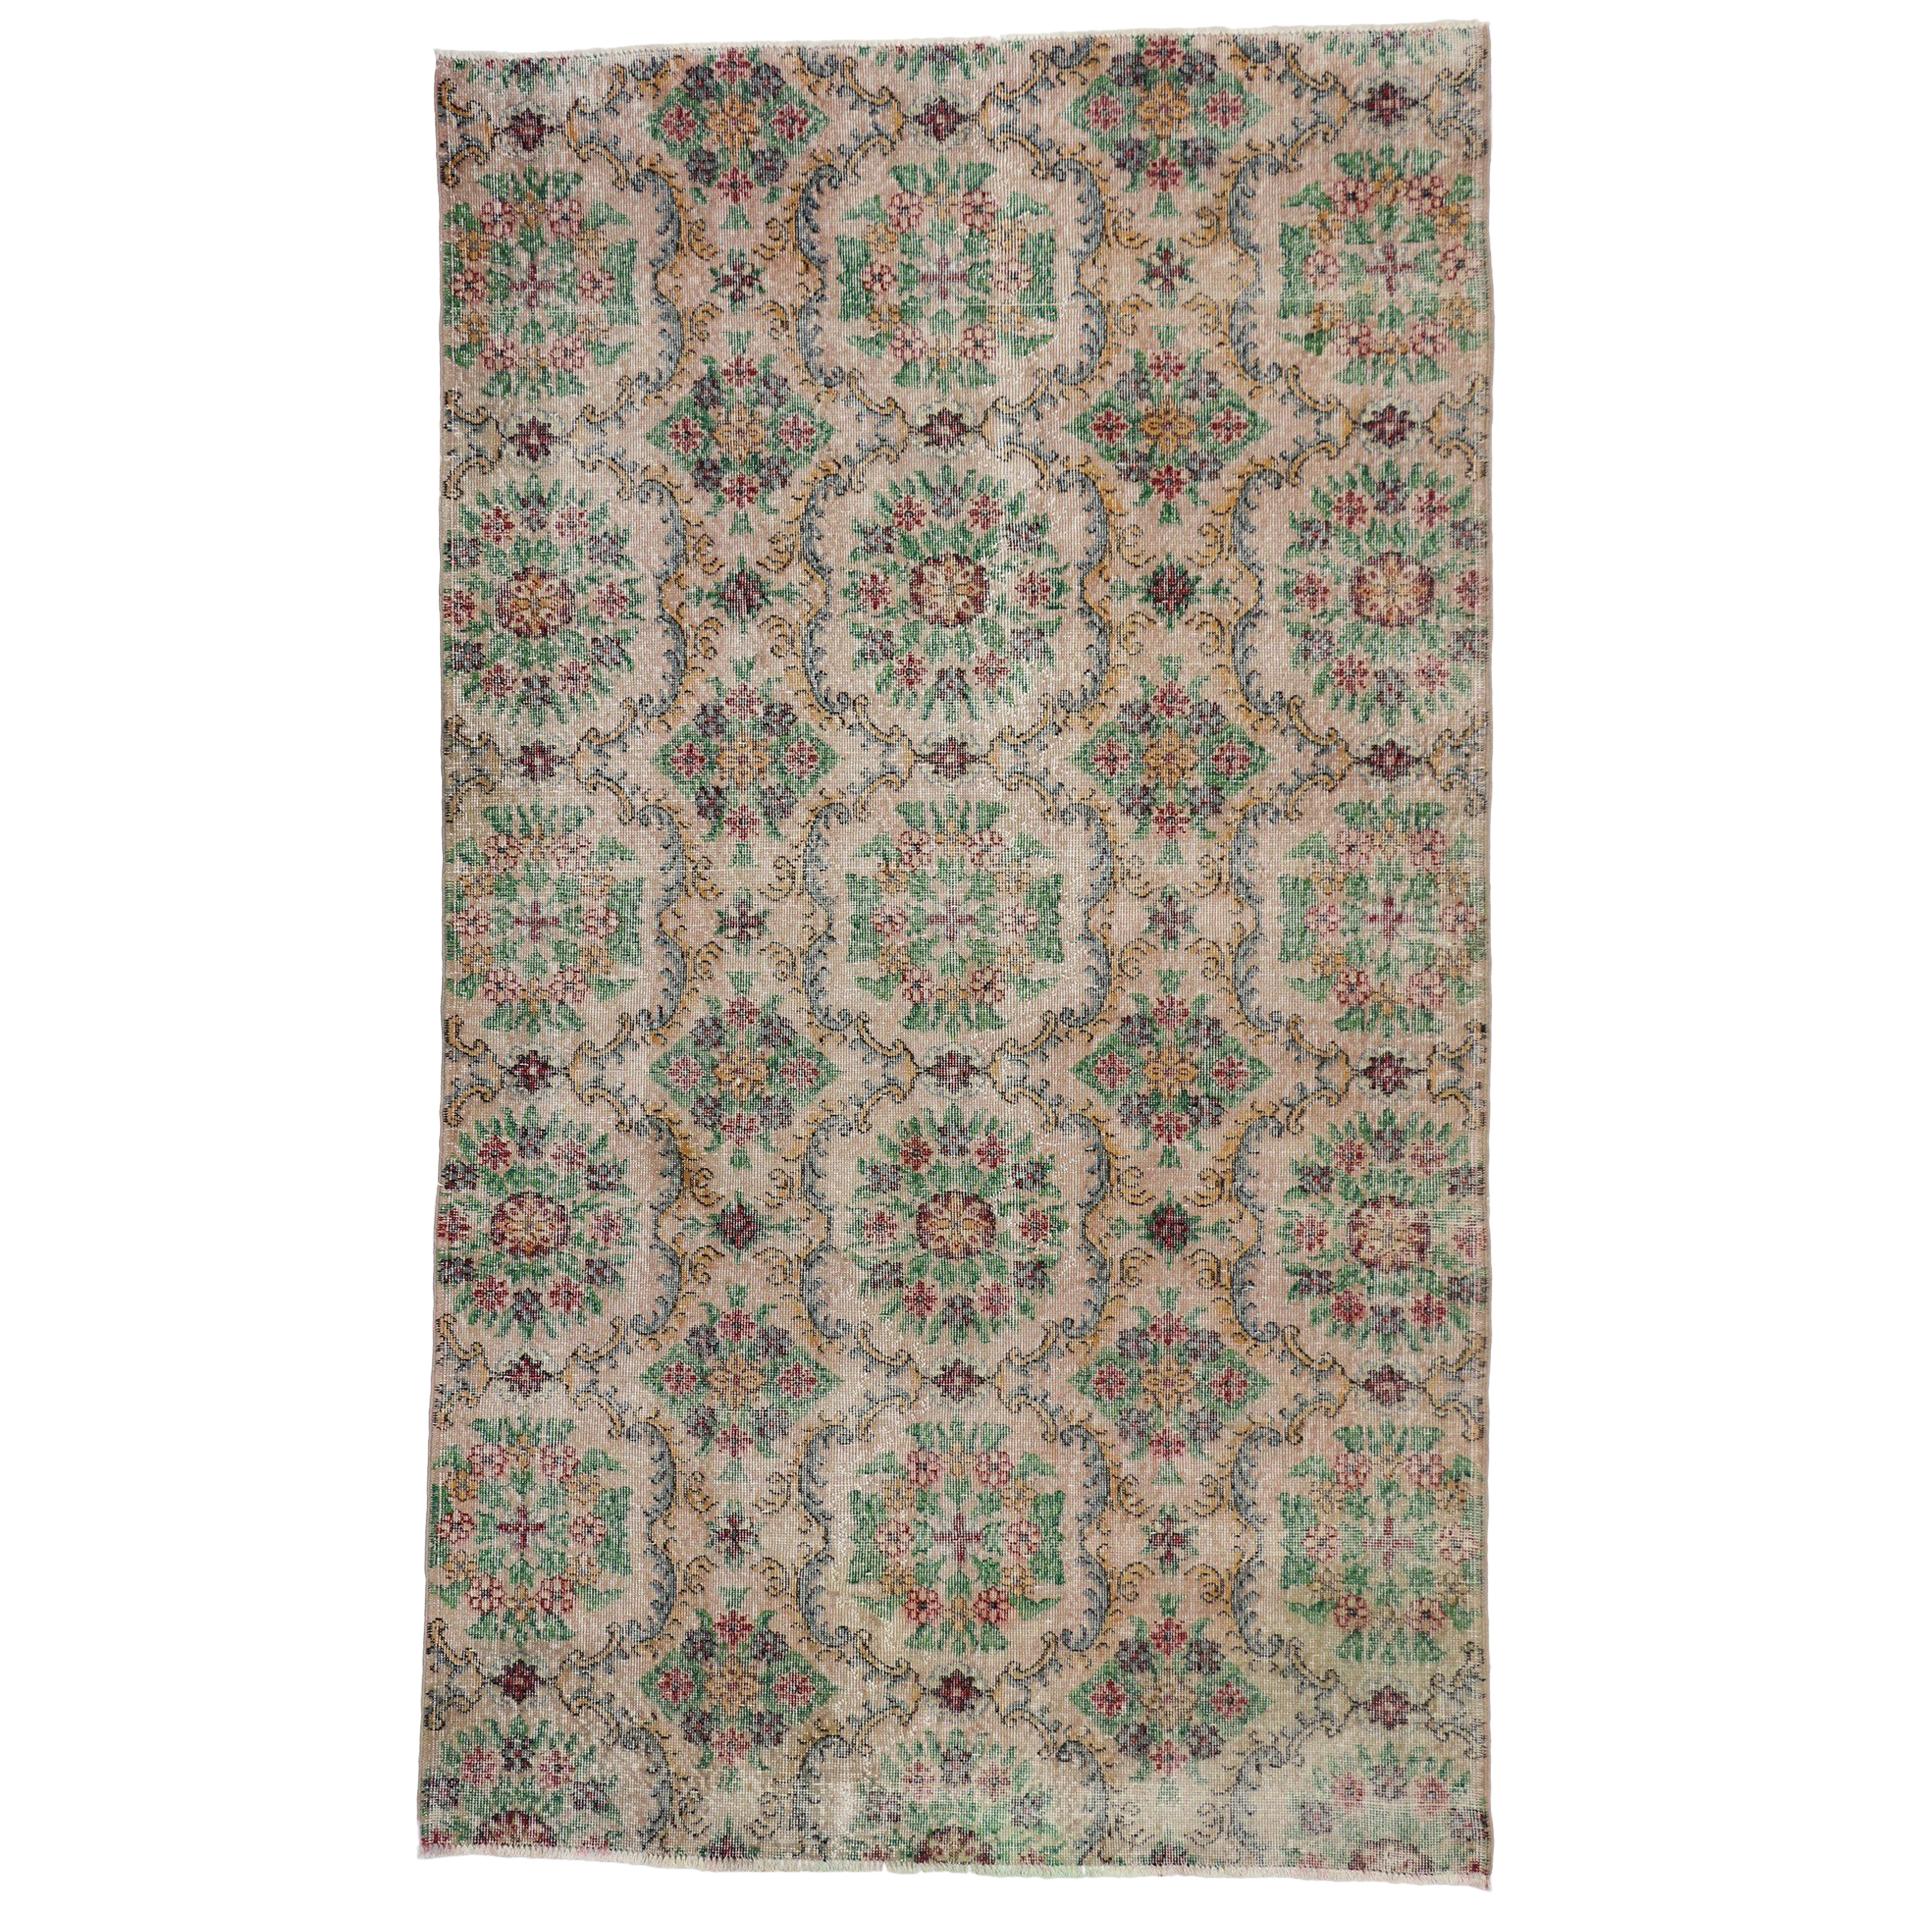 Distressed Vintage Turkish Sivas Rug with Swedish Country Farmhouse Style